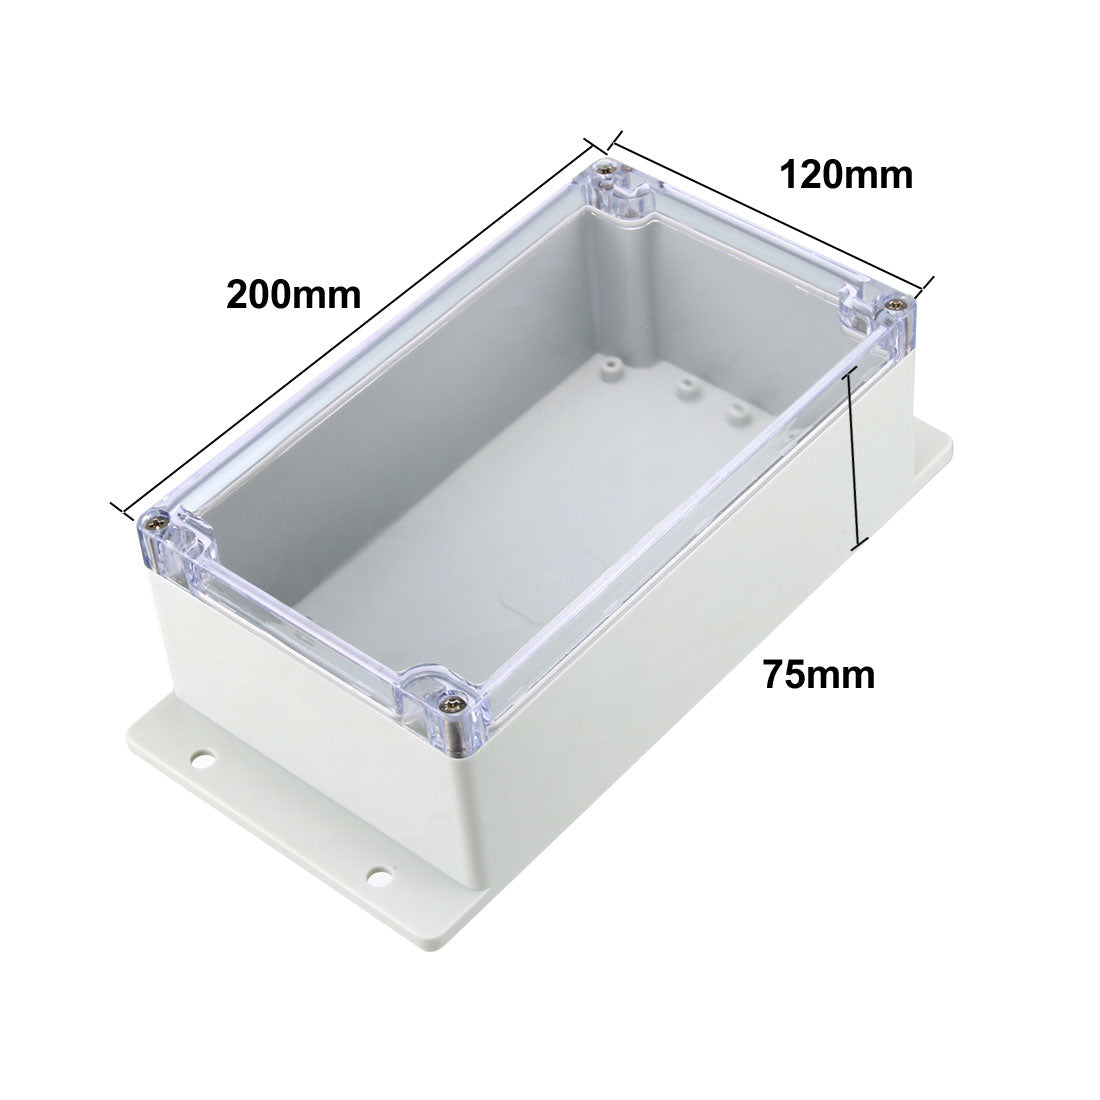 uxcell Uxcell 200 x 120 x 75mm Electronic Plastic DIY Junction Box Enclosure Case w Clear Cover